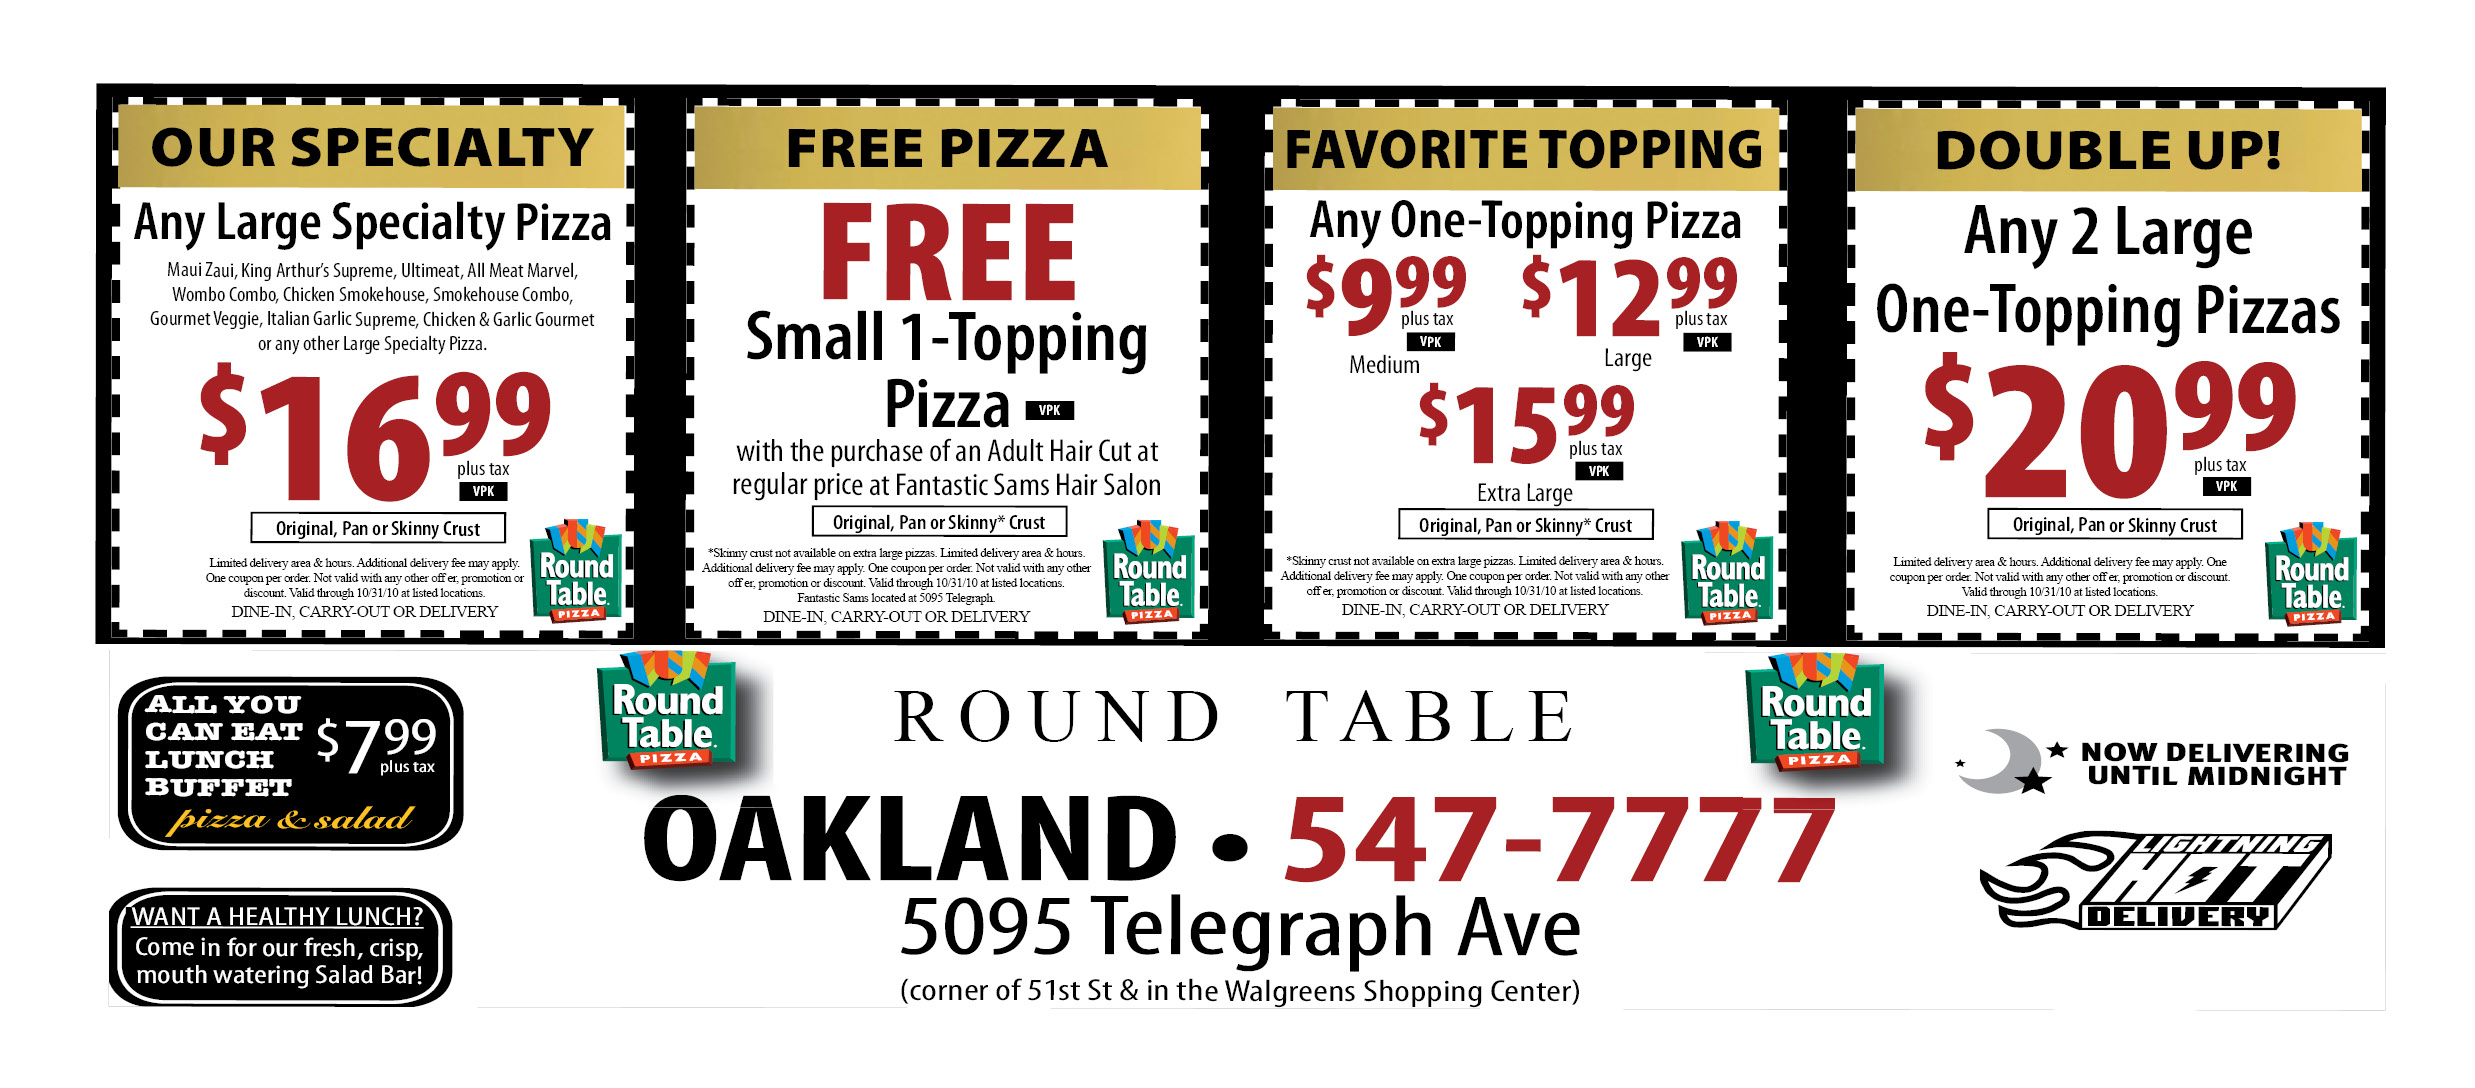 Fancy Round Table Printable Coupons In Stunning Home Decoration - Free Printable Round Table Pizza Coupons